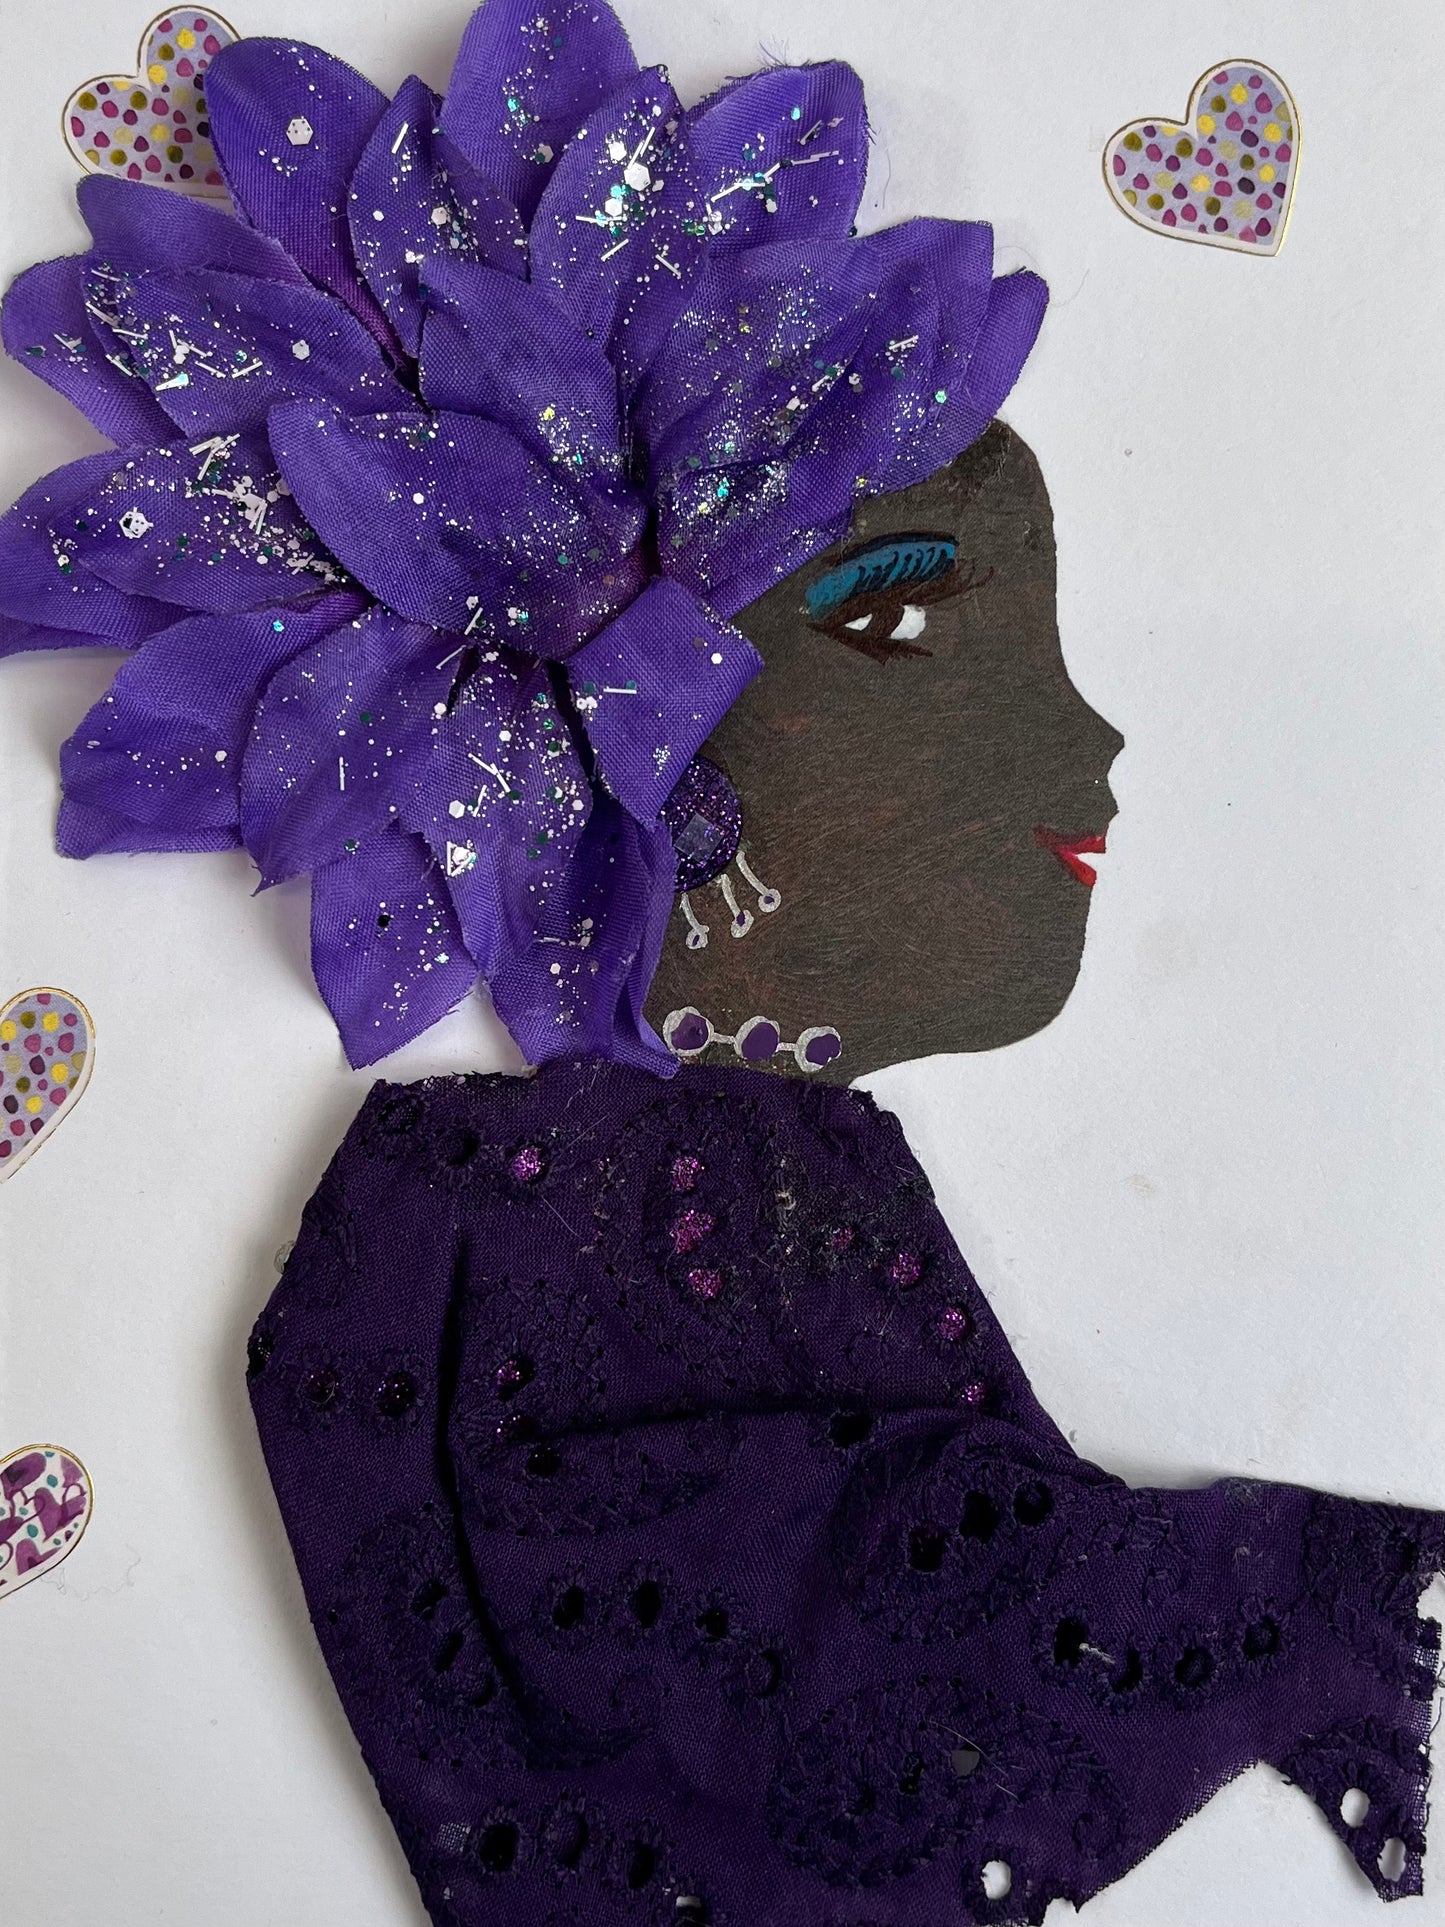 This card is called Jamie. She wears a purple eyelet blouse and a large purple flower in her hair. Surrounding her there is small purple hearts. 